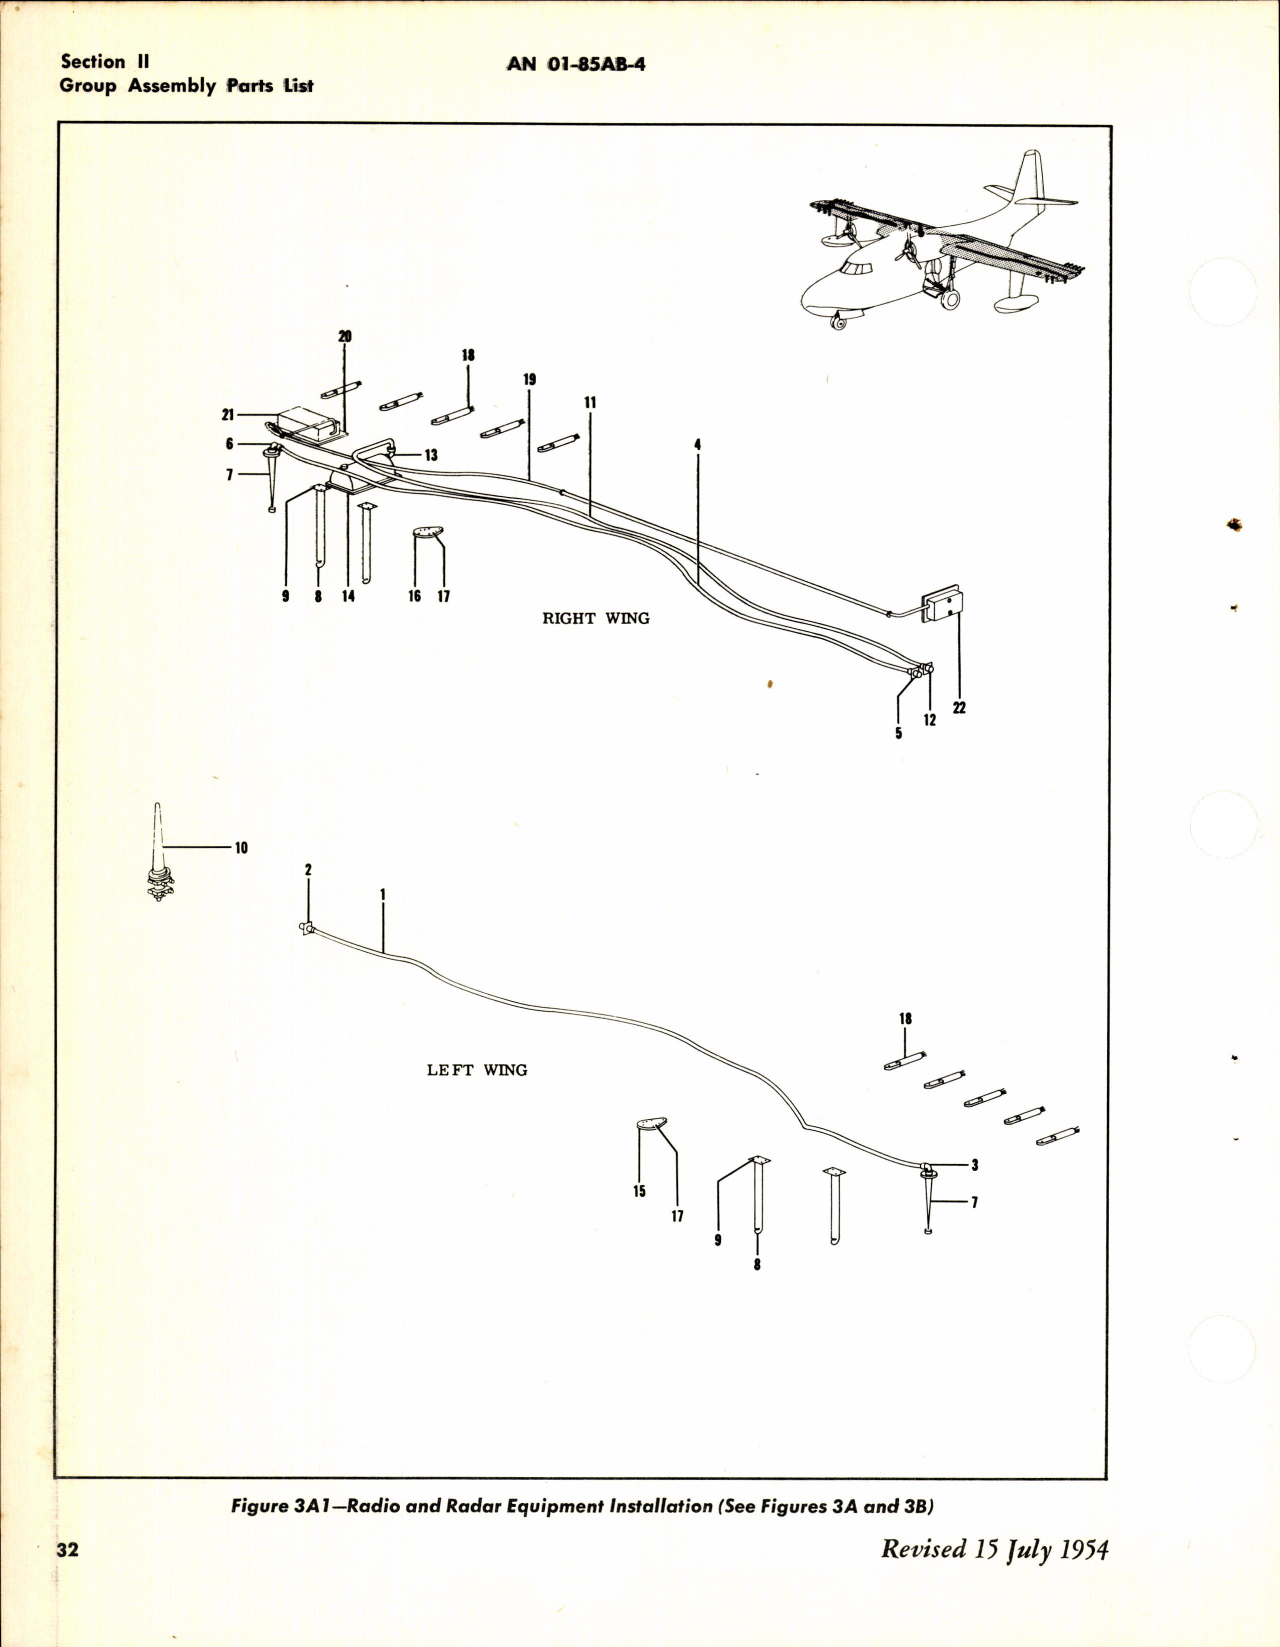 Sample page 48 from AirCorps Library document: Parts Catalog for SA-16A-GR, UF-1, and UF-1T Aircraft